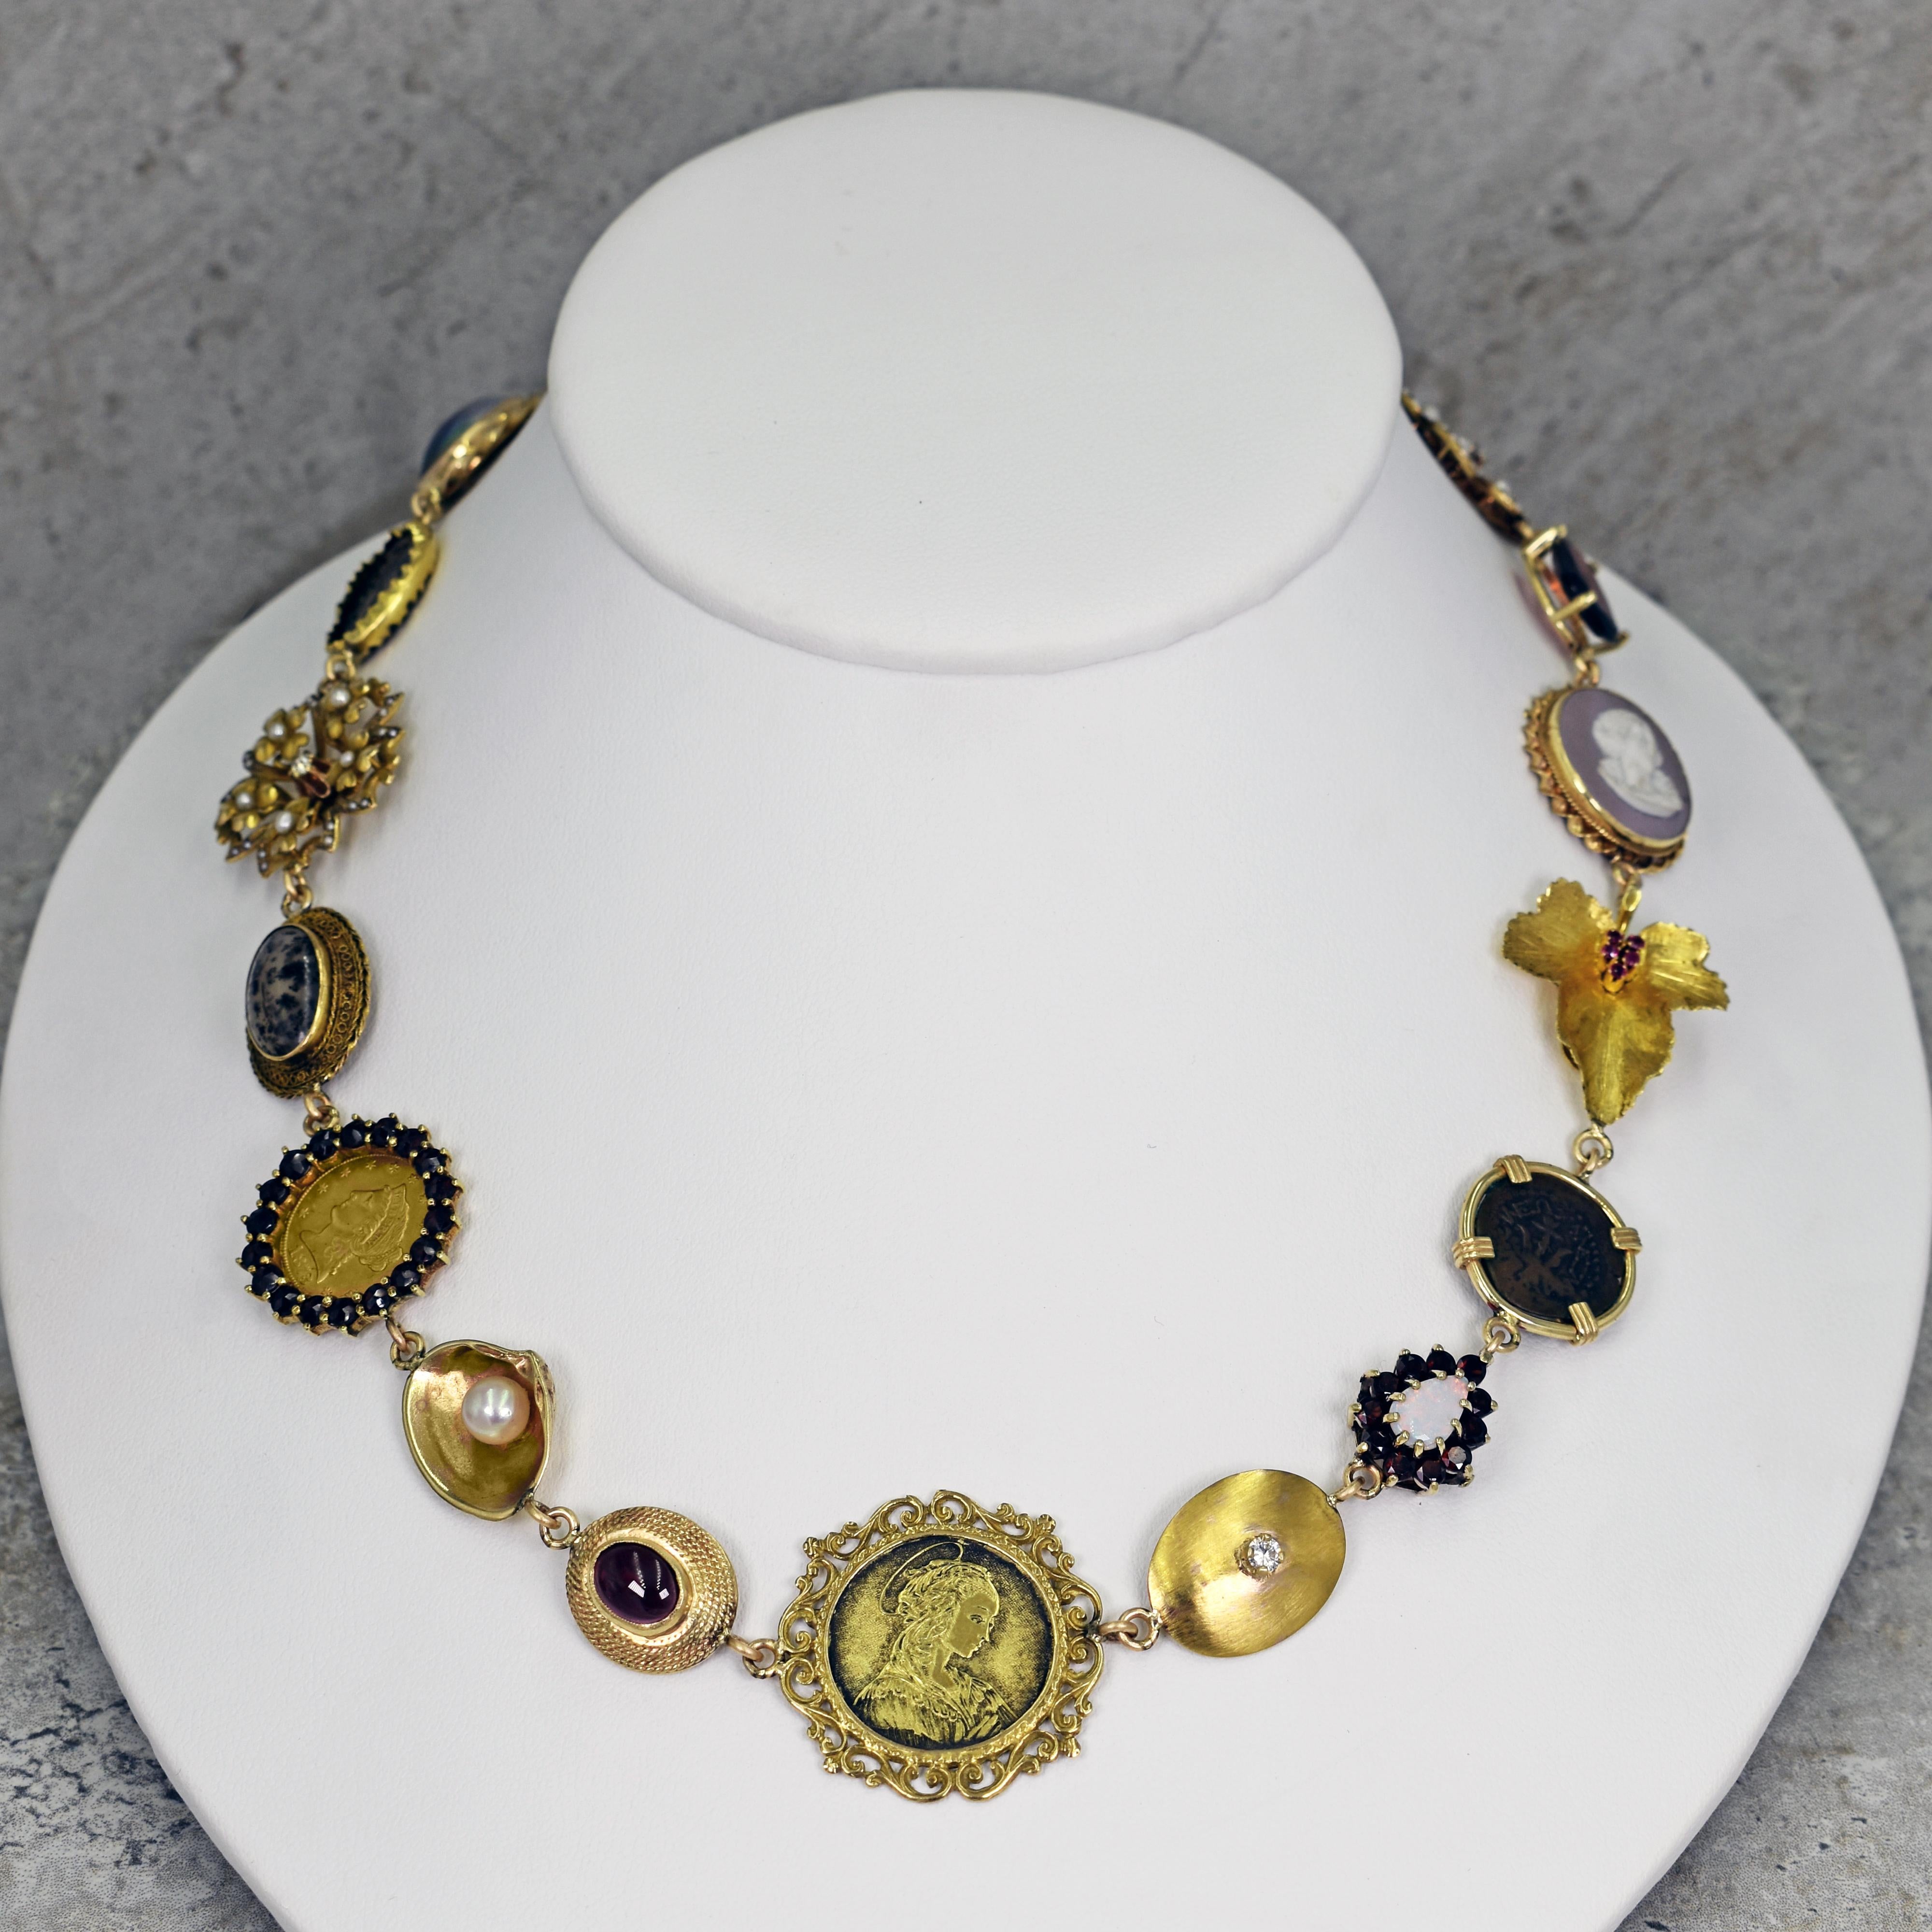 One-of-a-kind Vicki Orr 14k yellow gold Bohemian necklace with a variety of gemstones, vintage and antique jewelry components and an ancient coin. Necklace has 18 unique pieces, featuring Garnet, Bloodstone, Tahitian Pearl, Australian Matrix Opal,